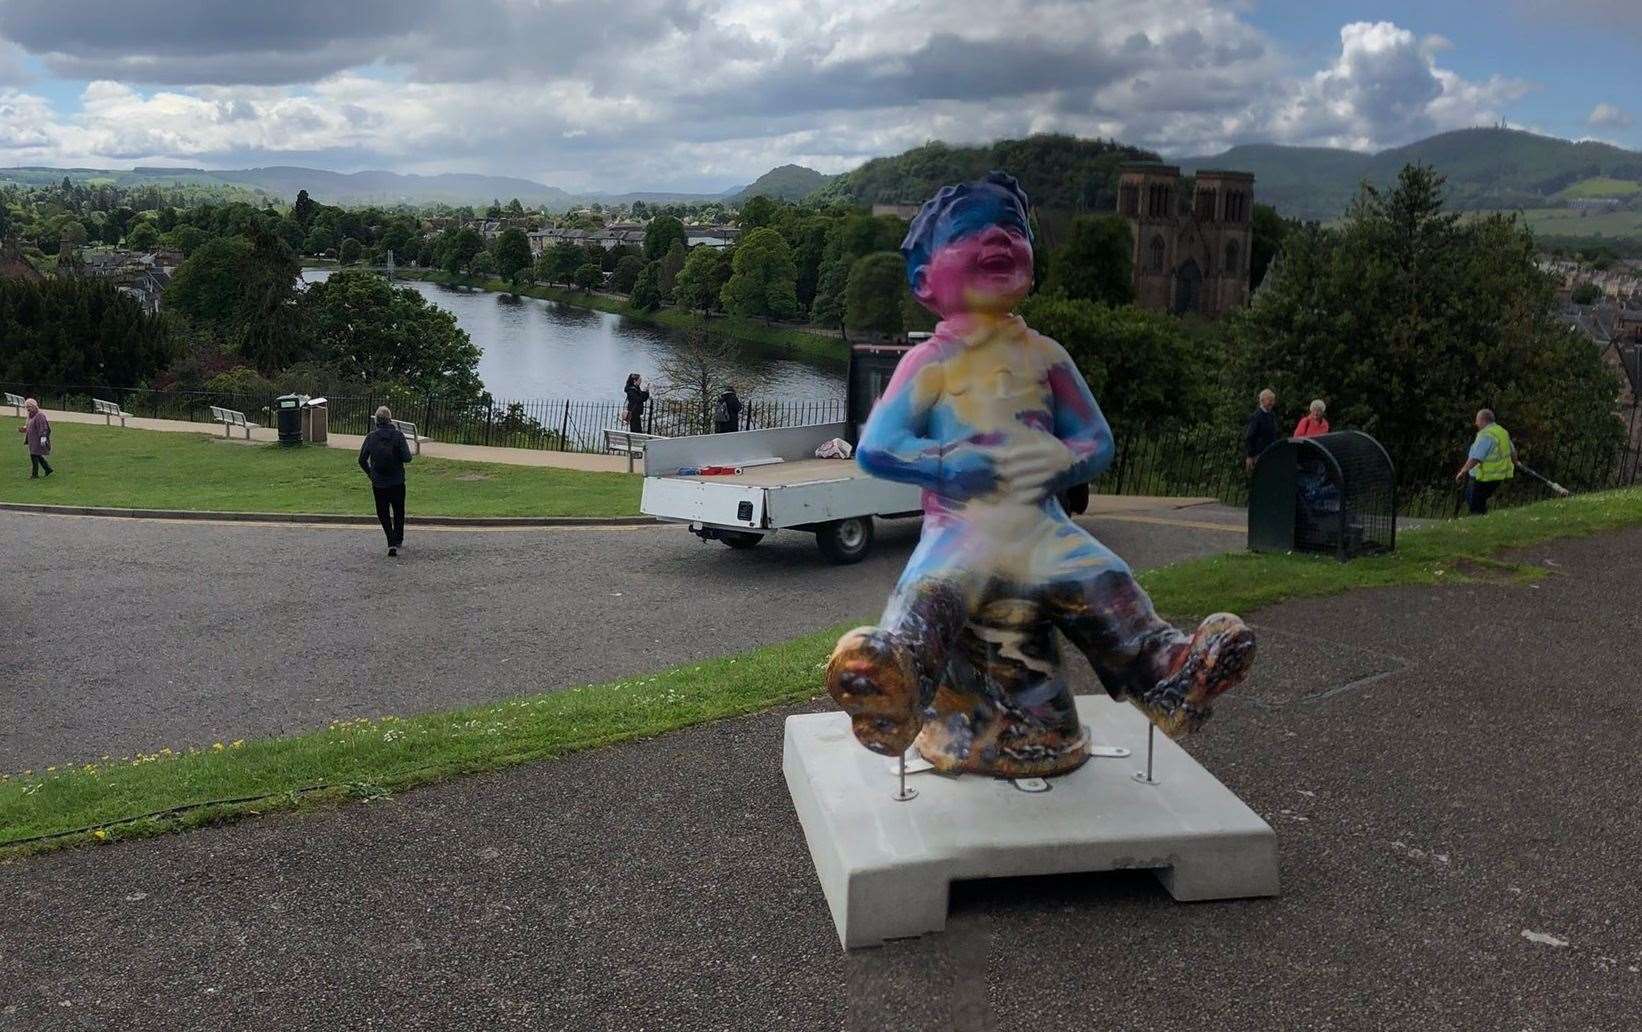 The Oor Wullie outside Inverness Castle was inspired by Ben Nevis.